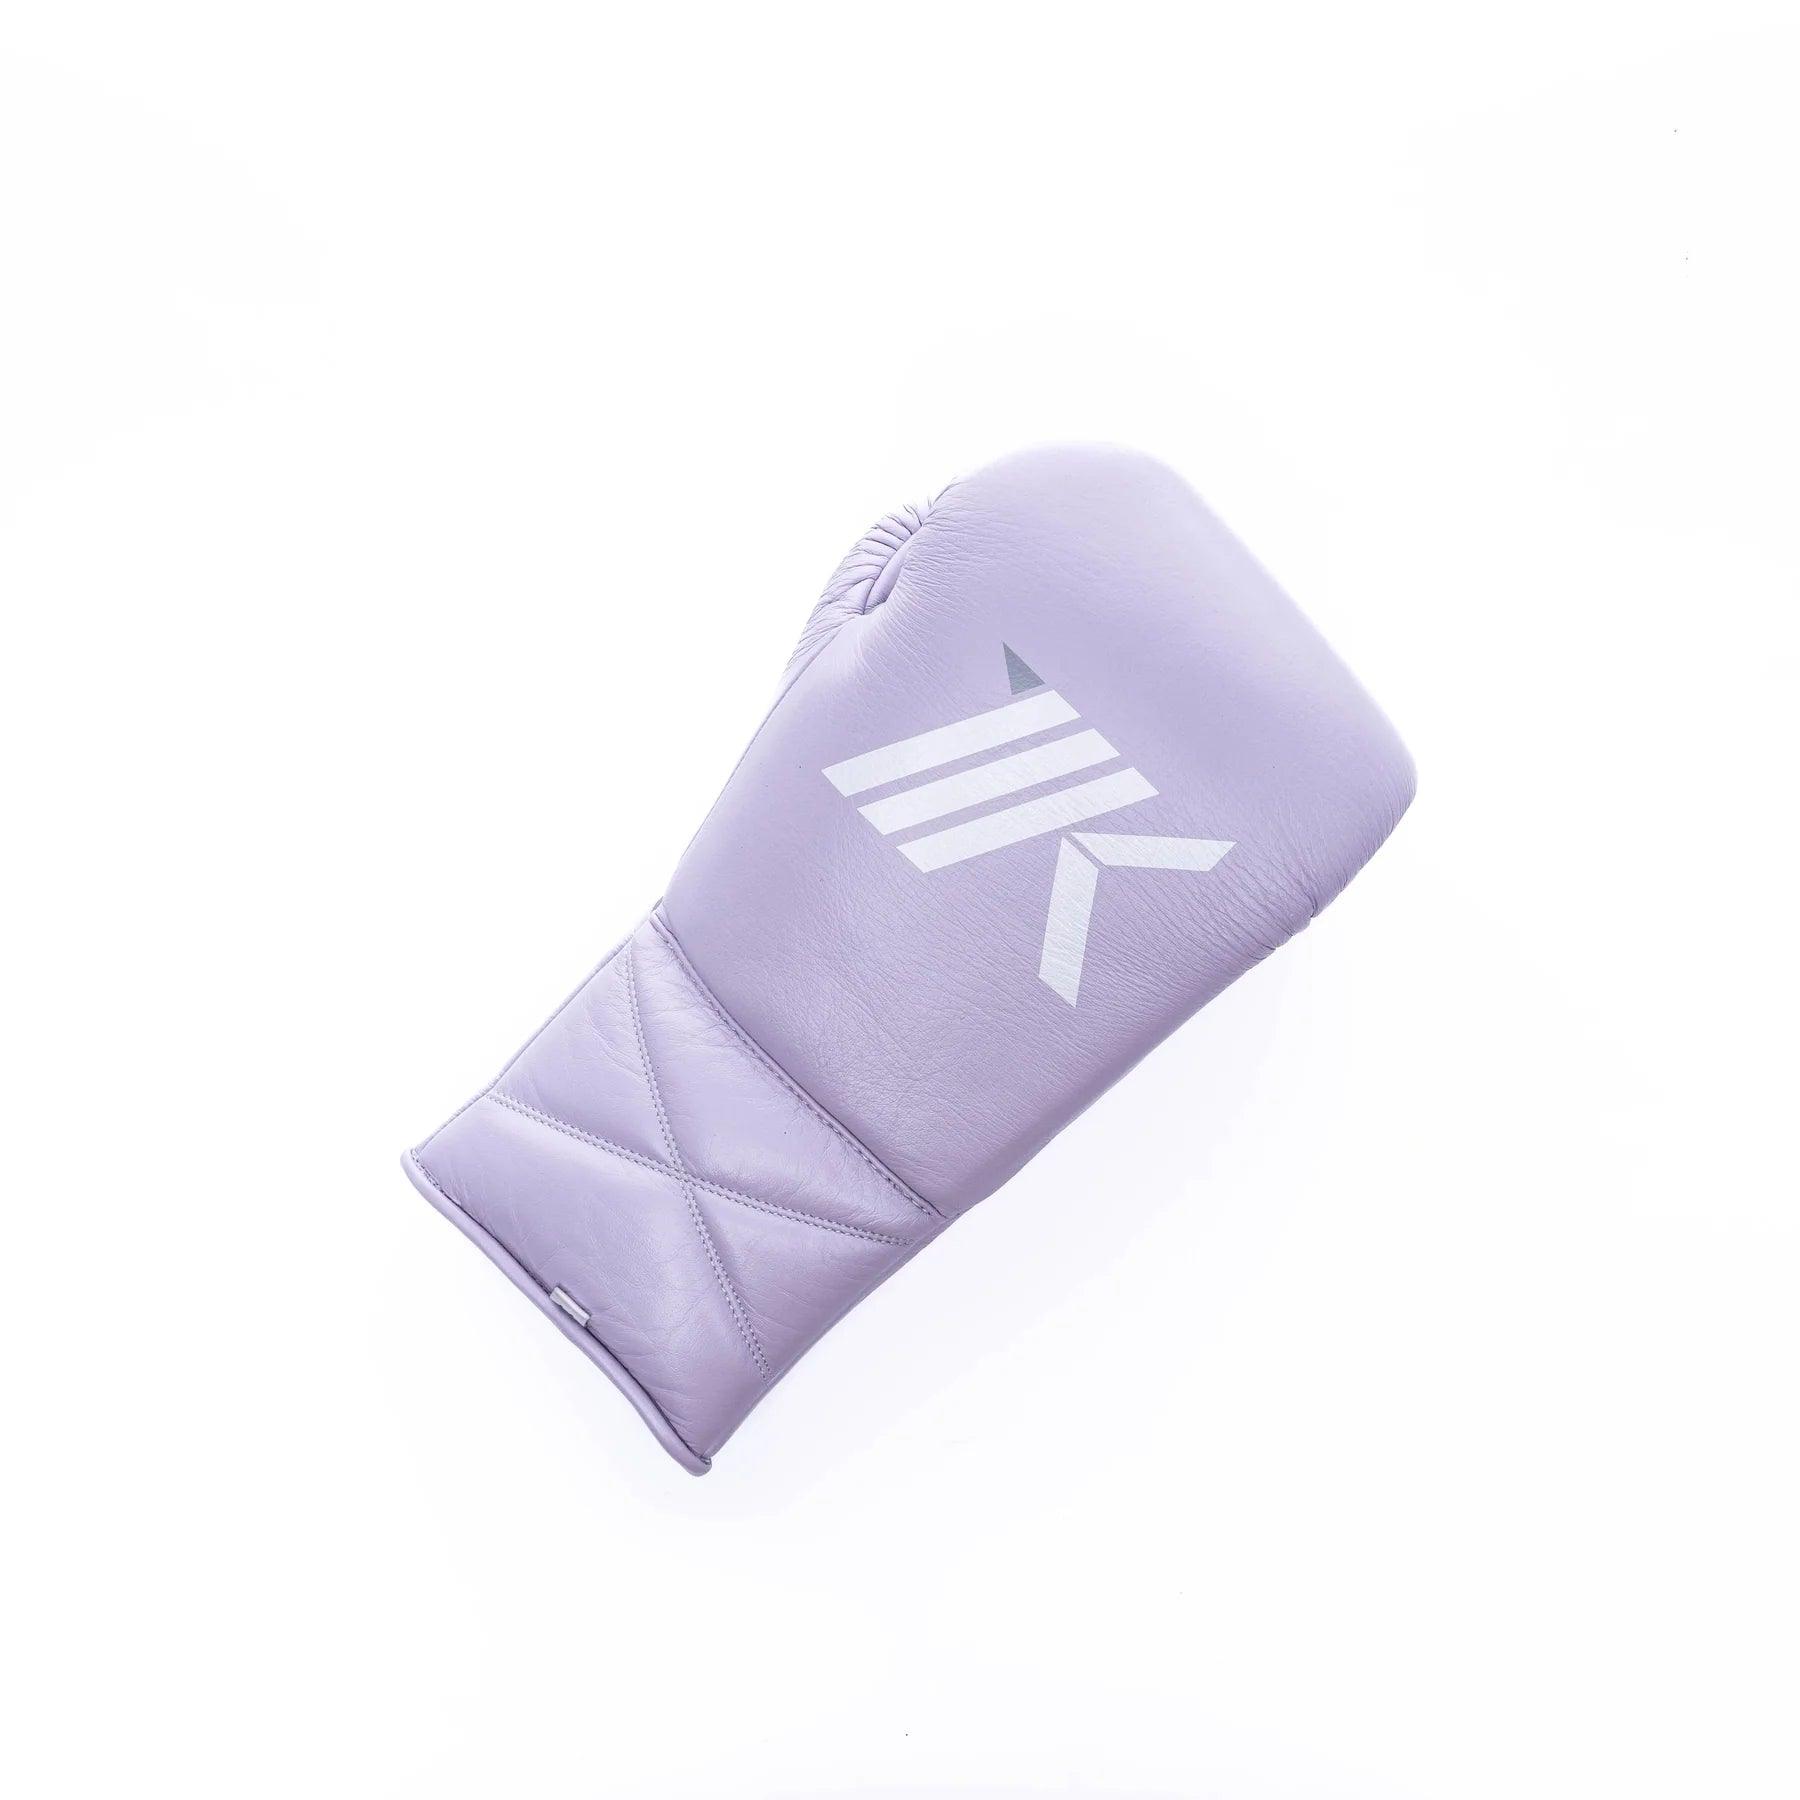 Periwinkle purple lace-up boxing gloves for training, sparring, bag work, and mitt work handcrafted in genuine leather.  